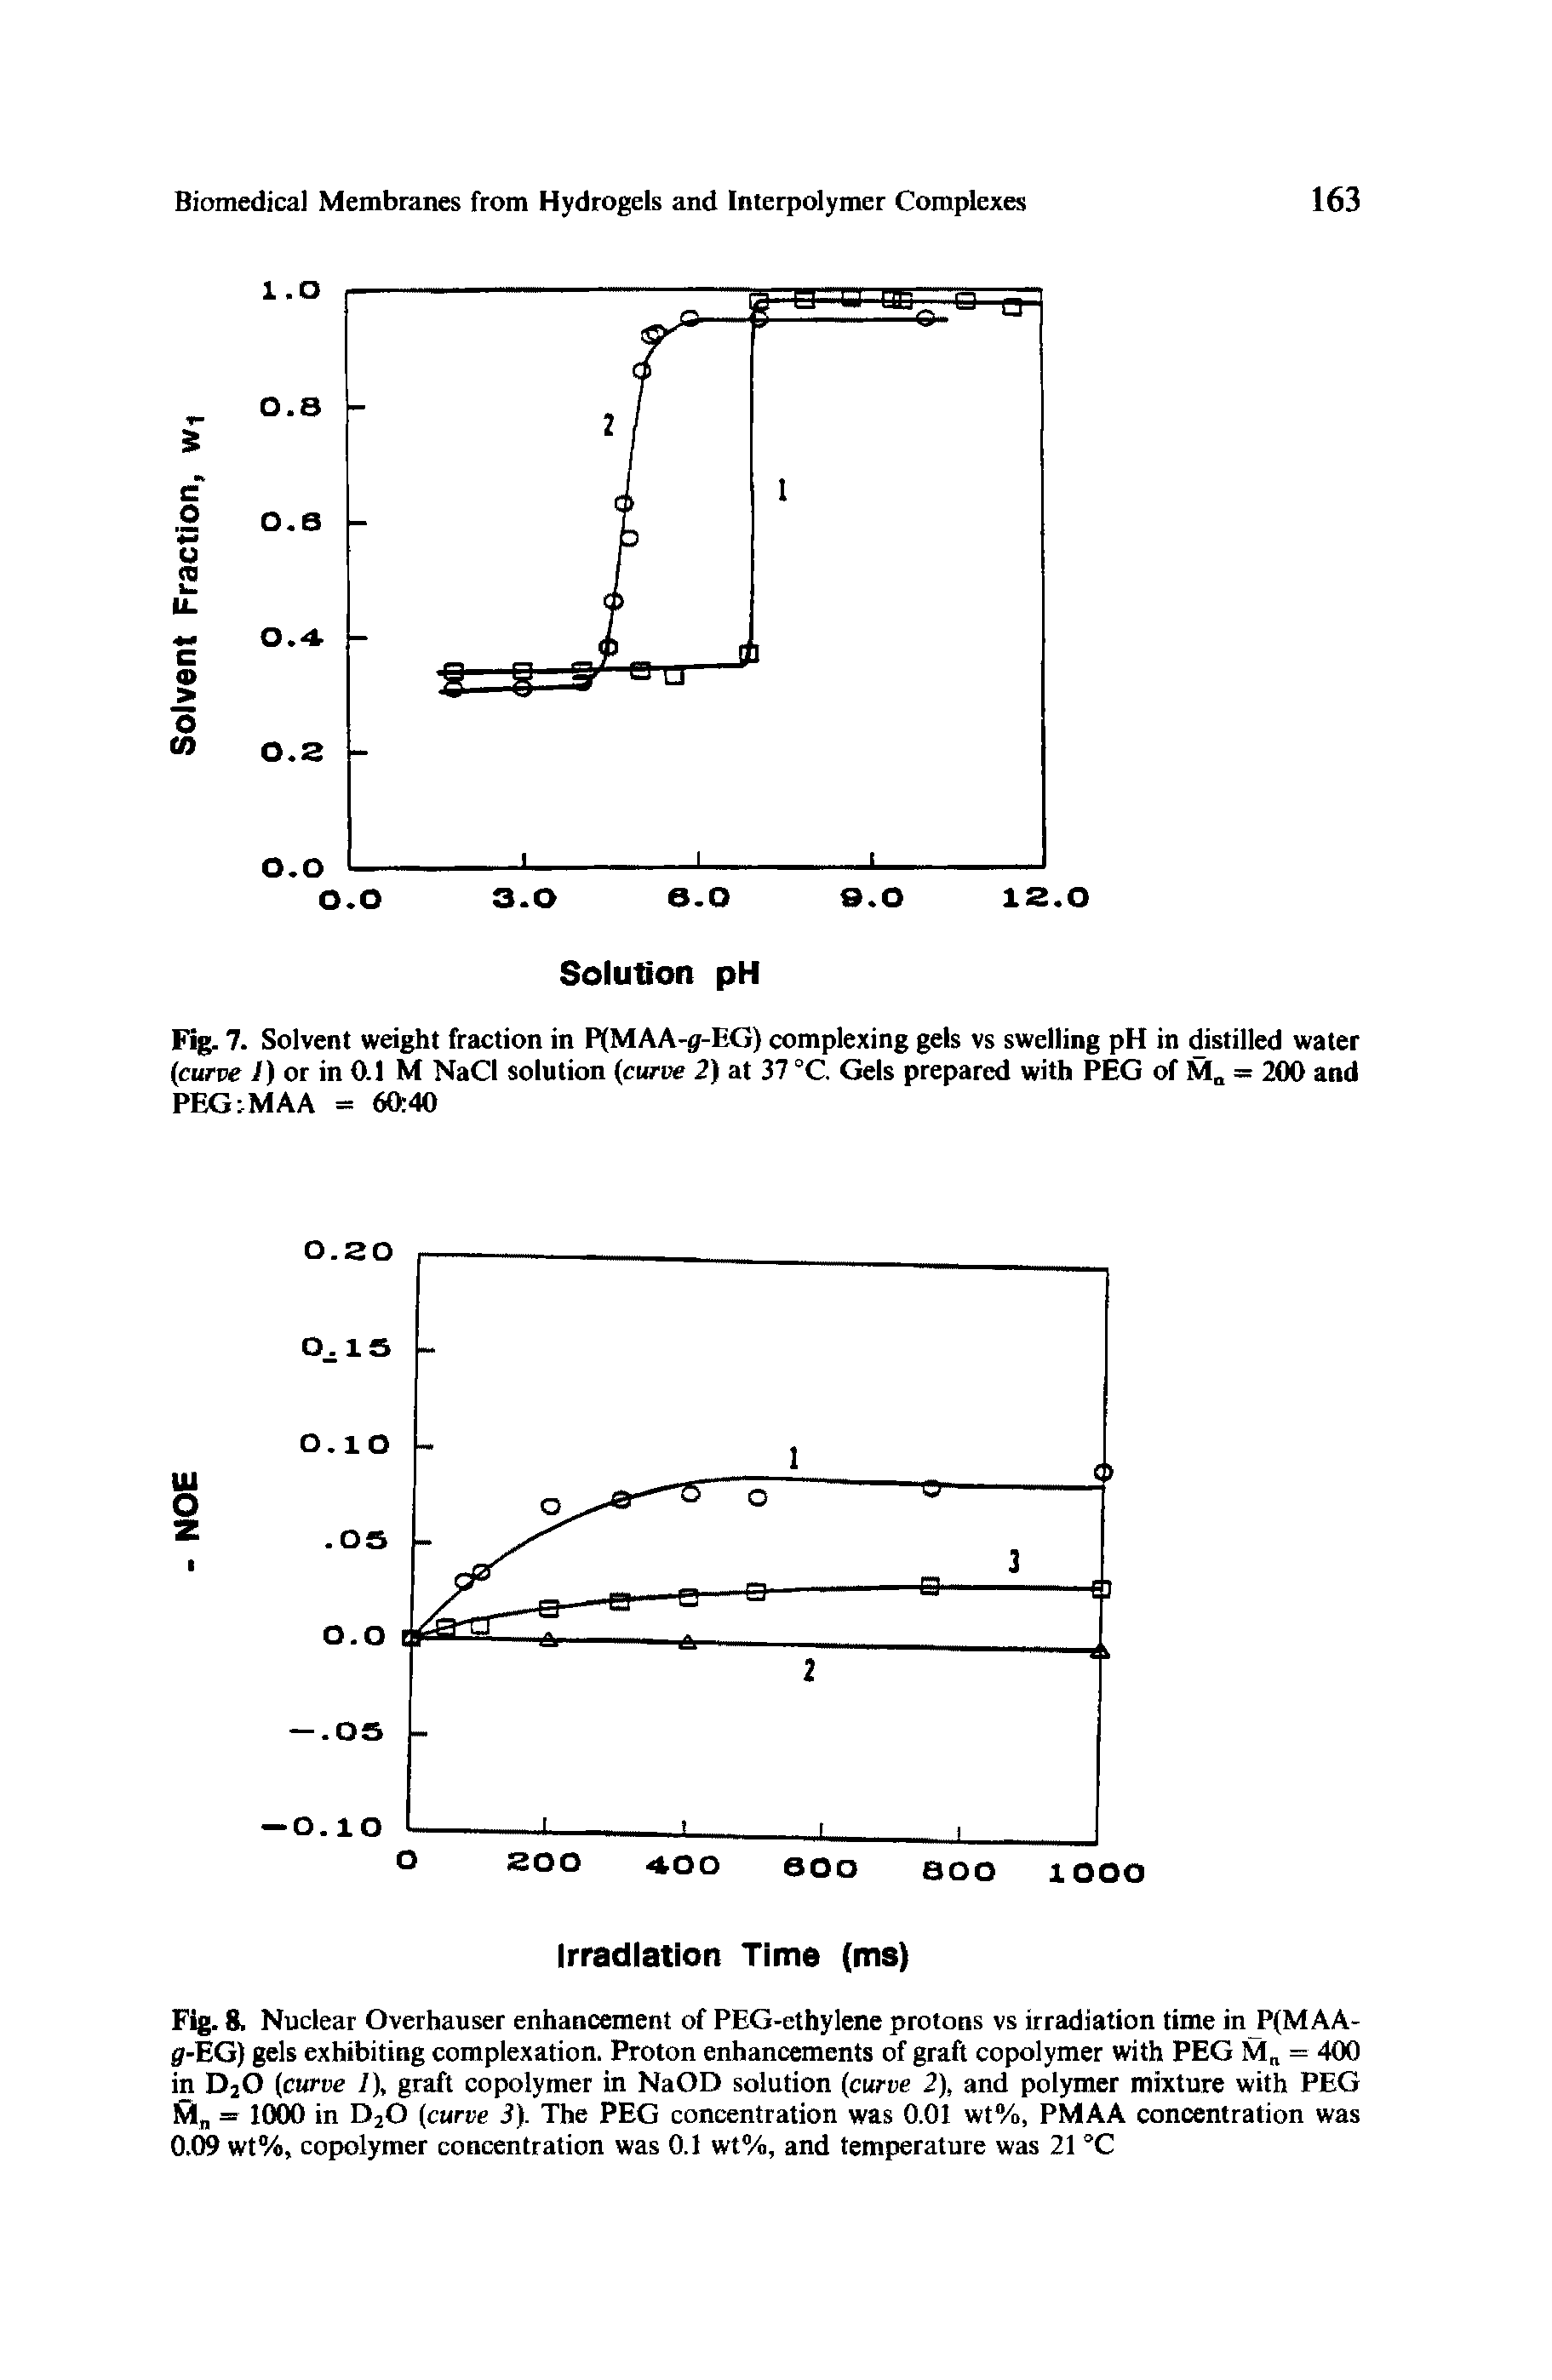 Fig. 7. Solvent weight fraction in P(MAA-g-EG) complexing gels vs swelling pH in distilled water (curve /) or in 0.1 M NaCI solution (curve 2) at 37 °C. Gels prepared with PEG of M = 200 and PEG MAA = 60 40...